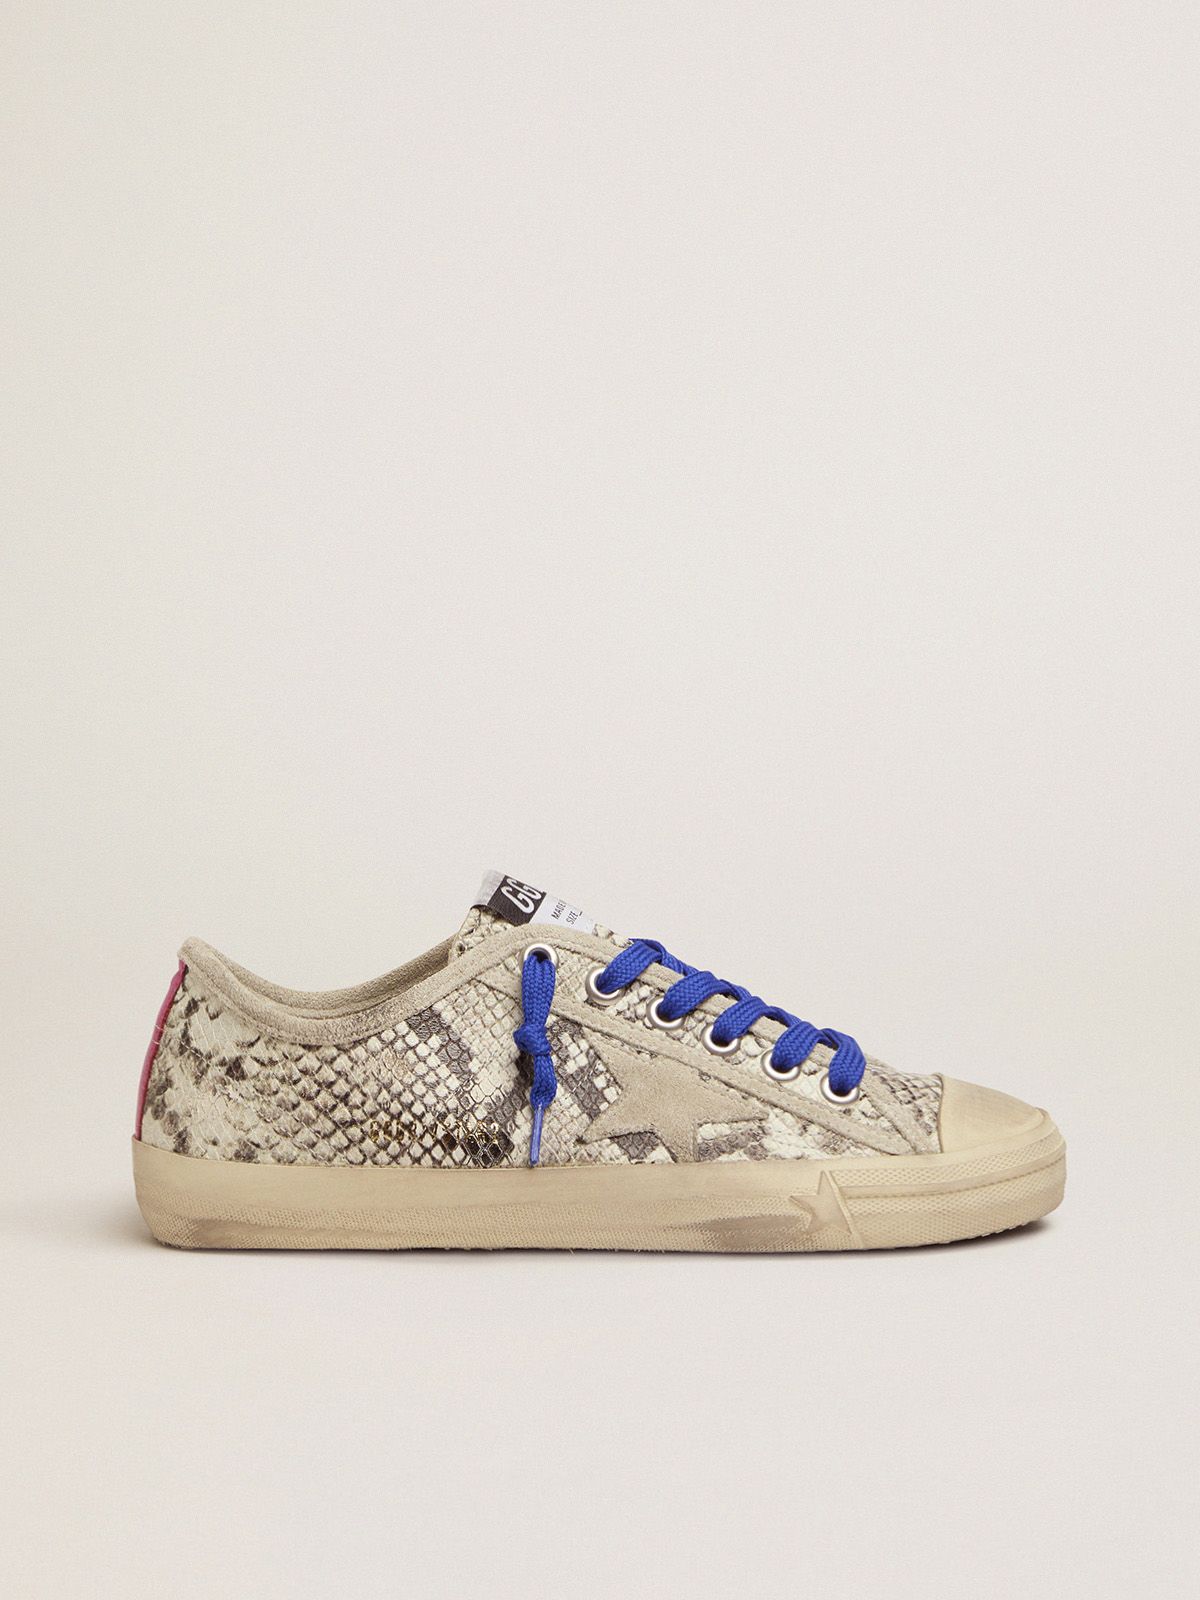 V-Star sneakers in snake-print leather with fuchsia insert